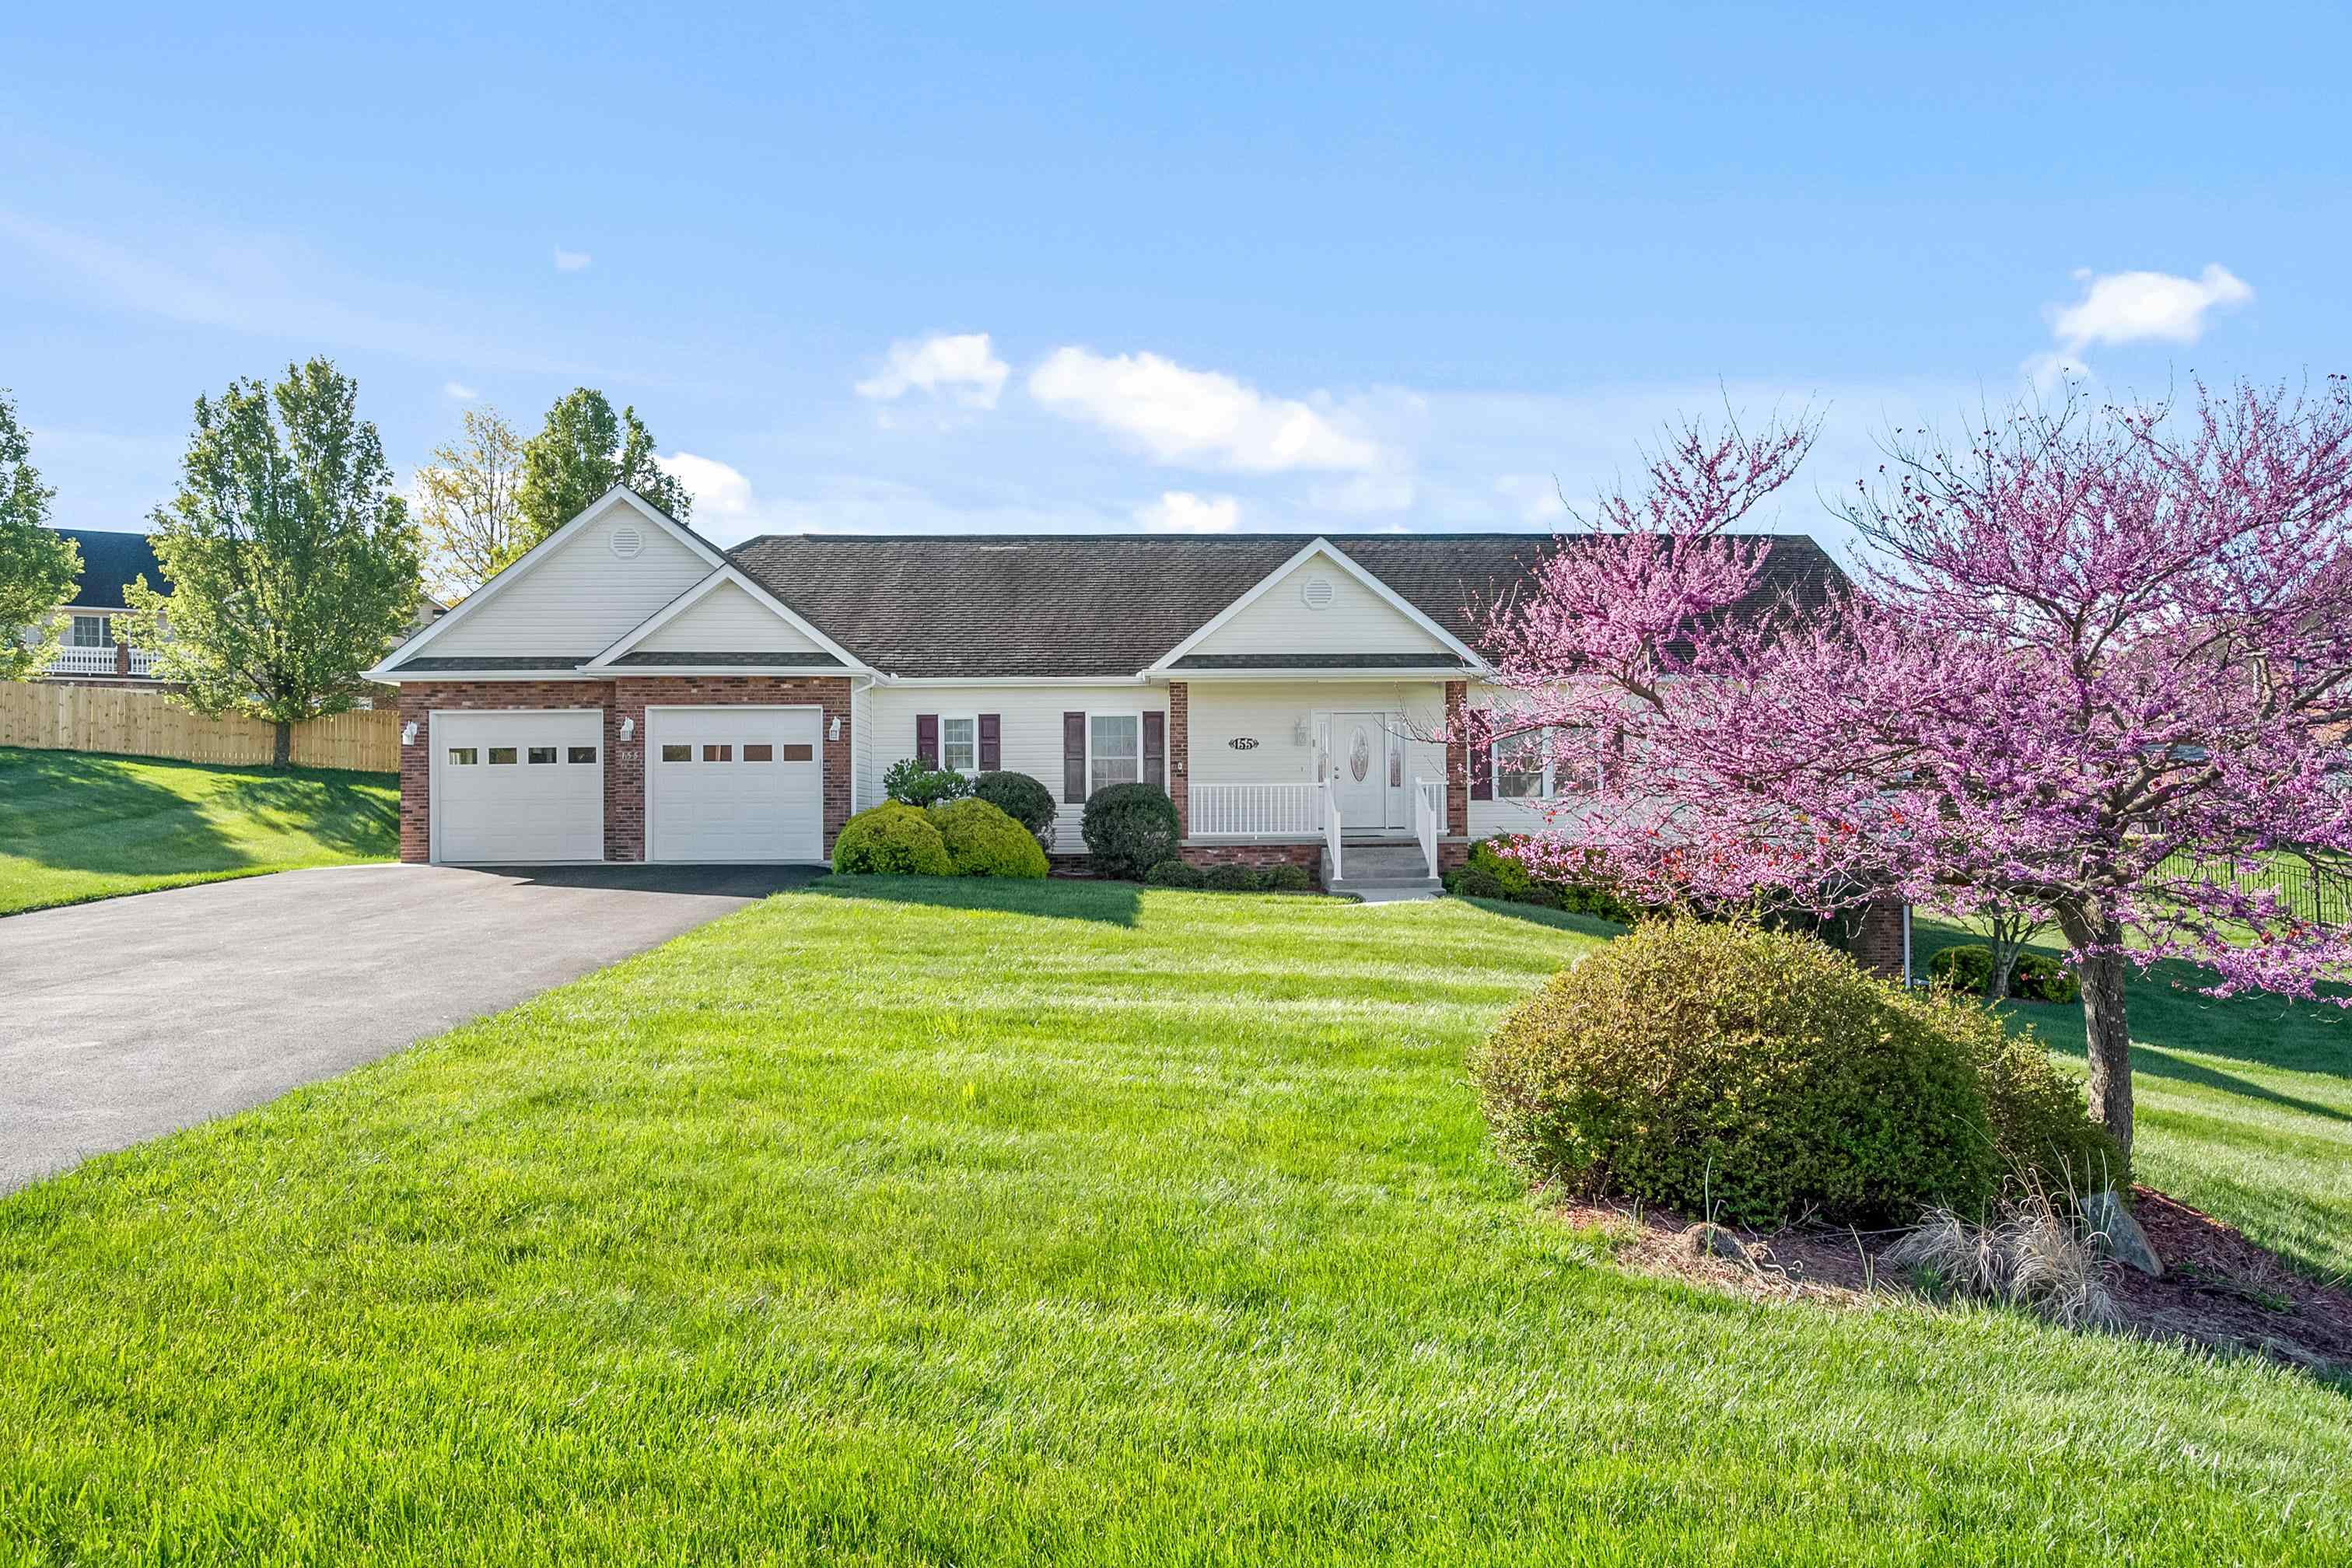 Open House Sunday, April 28th from 12:00-2:00! Welcome to main level living!! This 2,208 sq foot ranch boasts 4 spacious bedrooms, 3.5 bathrooms, and elegant 9' ceilings, providing enough space for the whole family. Cozy up by the gas fireplace in the living room, or entertain friends and family in the open kitchen!  The gorgeous double tray ceilings and built-in shelves in the kitchen provide a elegant touch!  The unfinished basement is plumbed for a bathroom and is simply waiting for you to finish the space to almost double your living space with the convenience of a walkout!  Entertain friends and family on the newly refinished deck, and enjoy the peace and quiet of a half acre lot located on a private cul-de-sac. Schedule your showing today! This home won't last long!